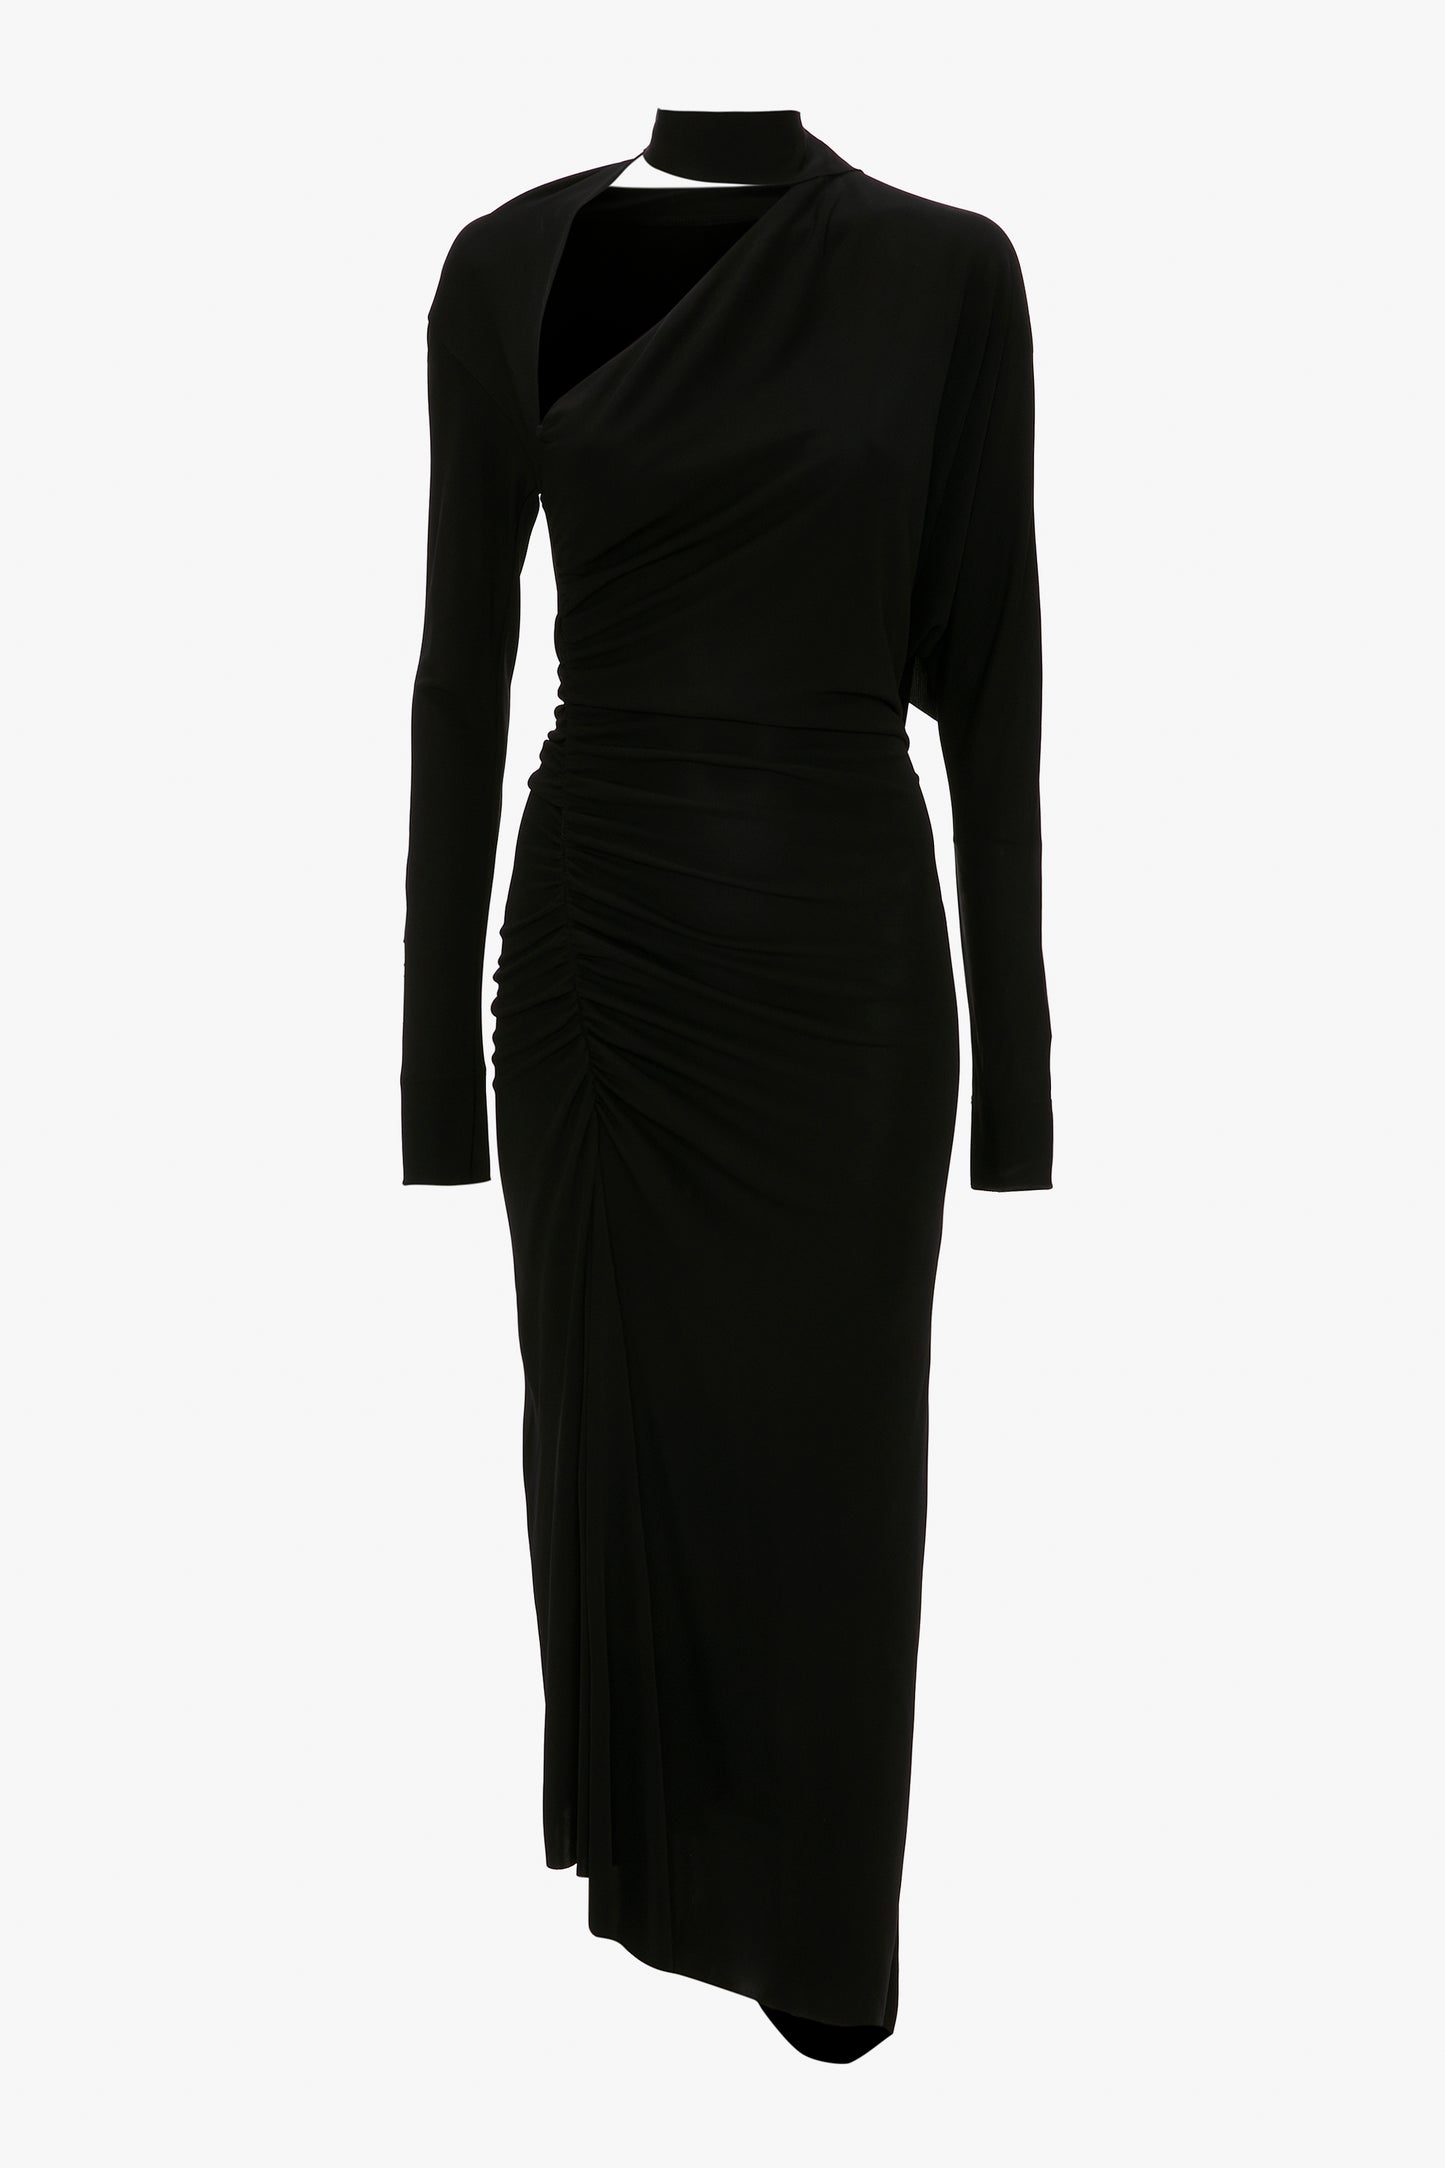 A Victoria Beckham black long-sleeve gown with a draped neckline and side ruching, displayed on a mannequin against a white background.